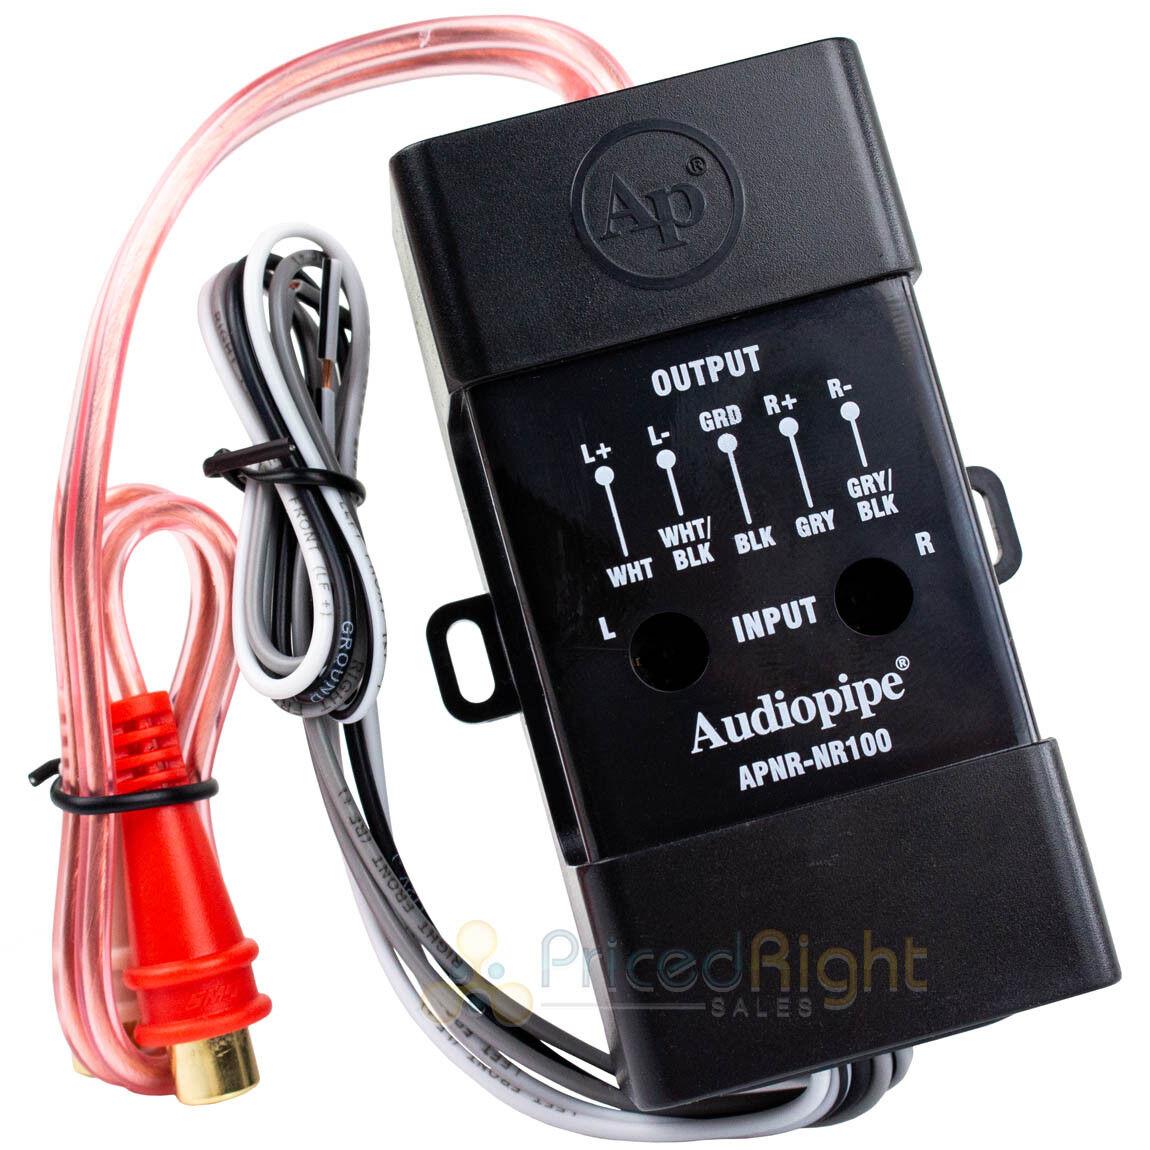 Audiopipe RCA Line Output Converter Power Amp Adapter Hi Low